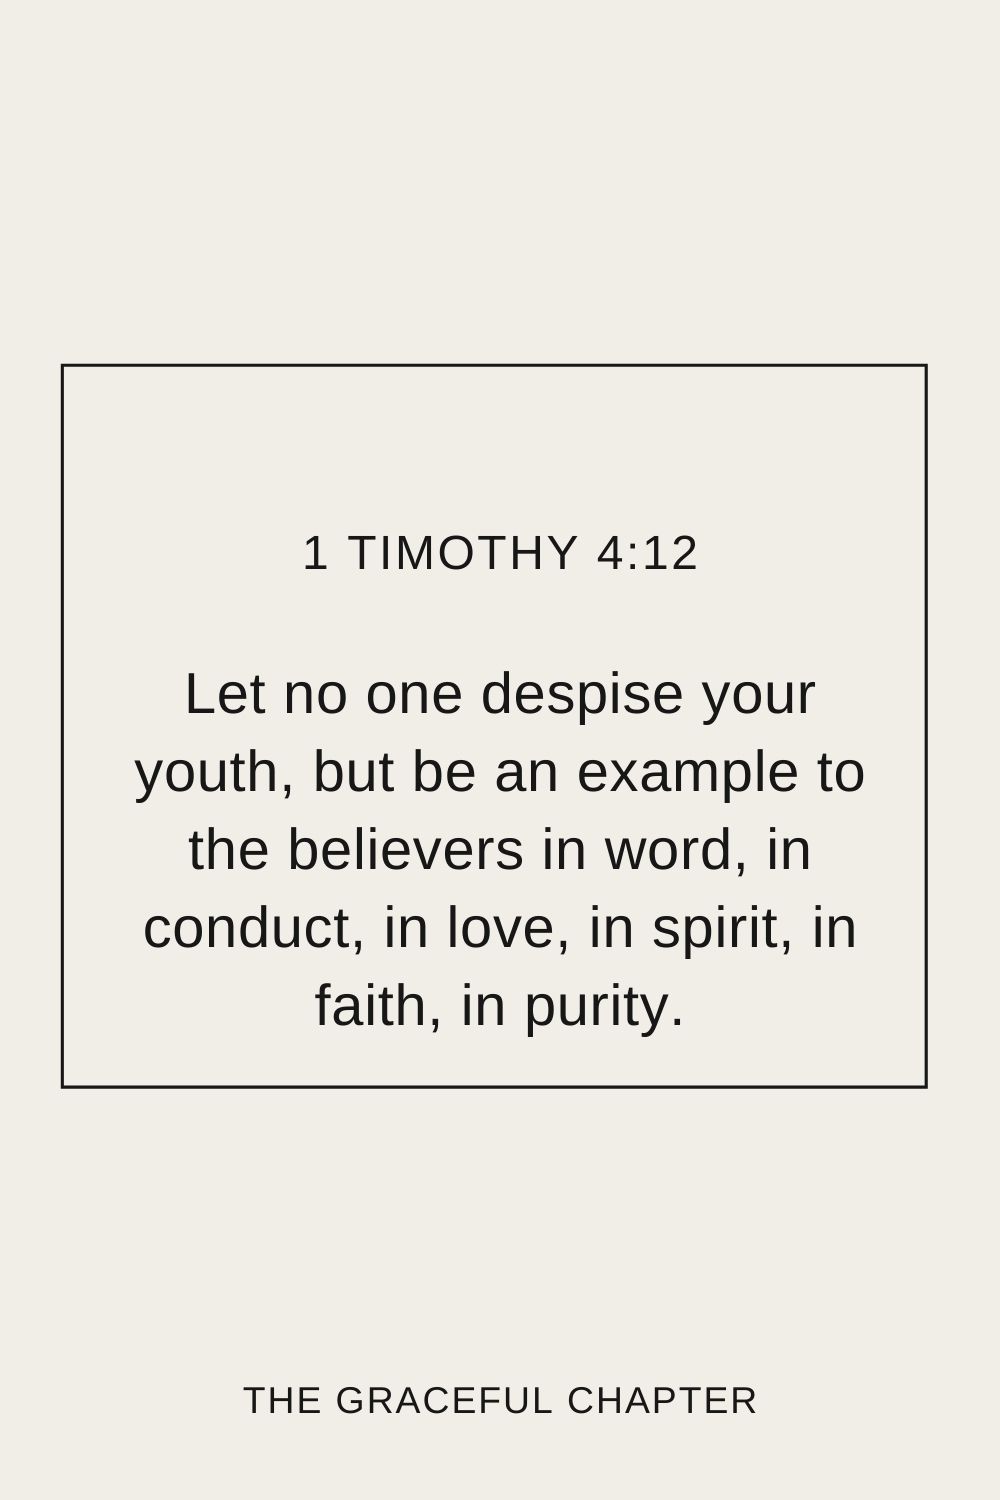  Let no one despise your youth, but be an example to the believers in word, in conduct, in love, in spirit, in faith, in purity. 1 Timothy 4:12